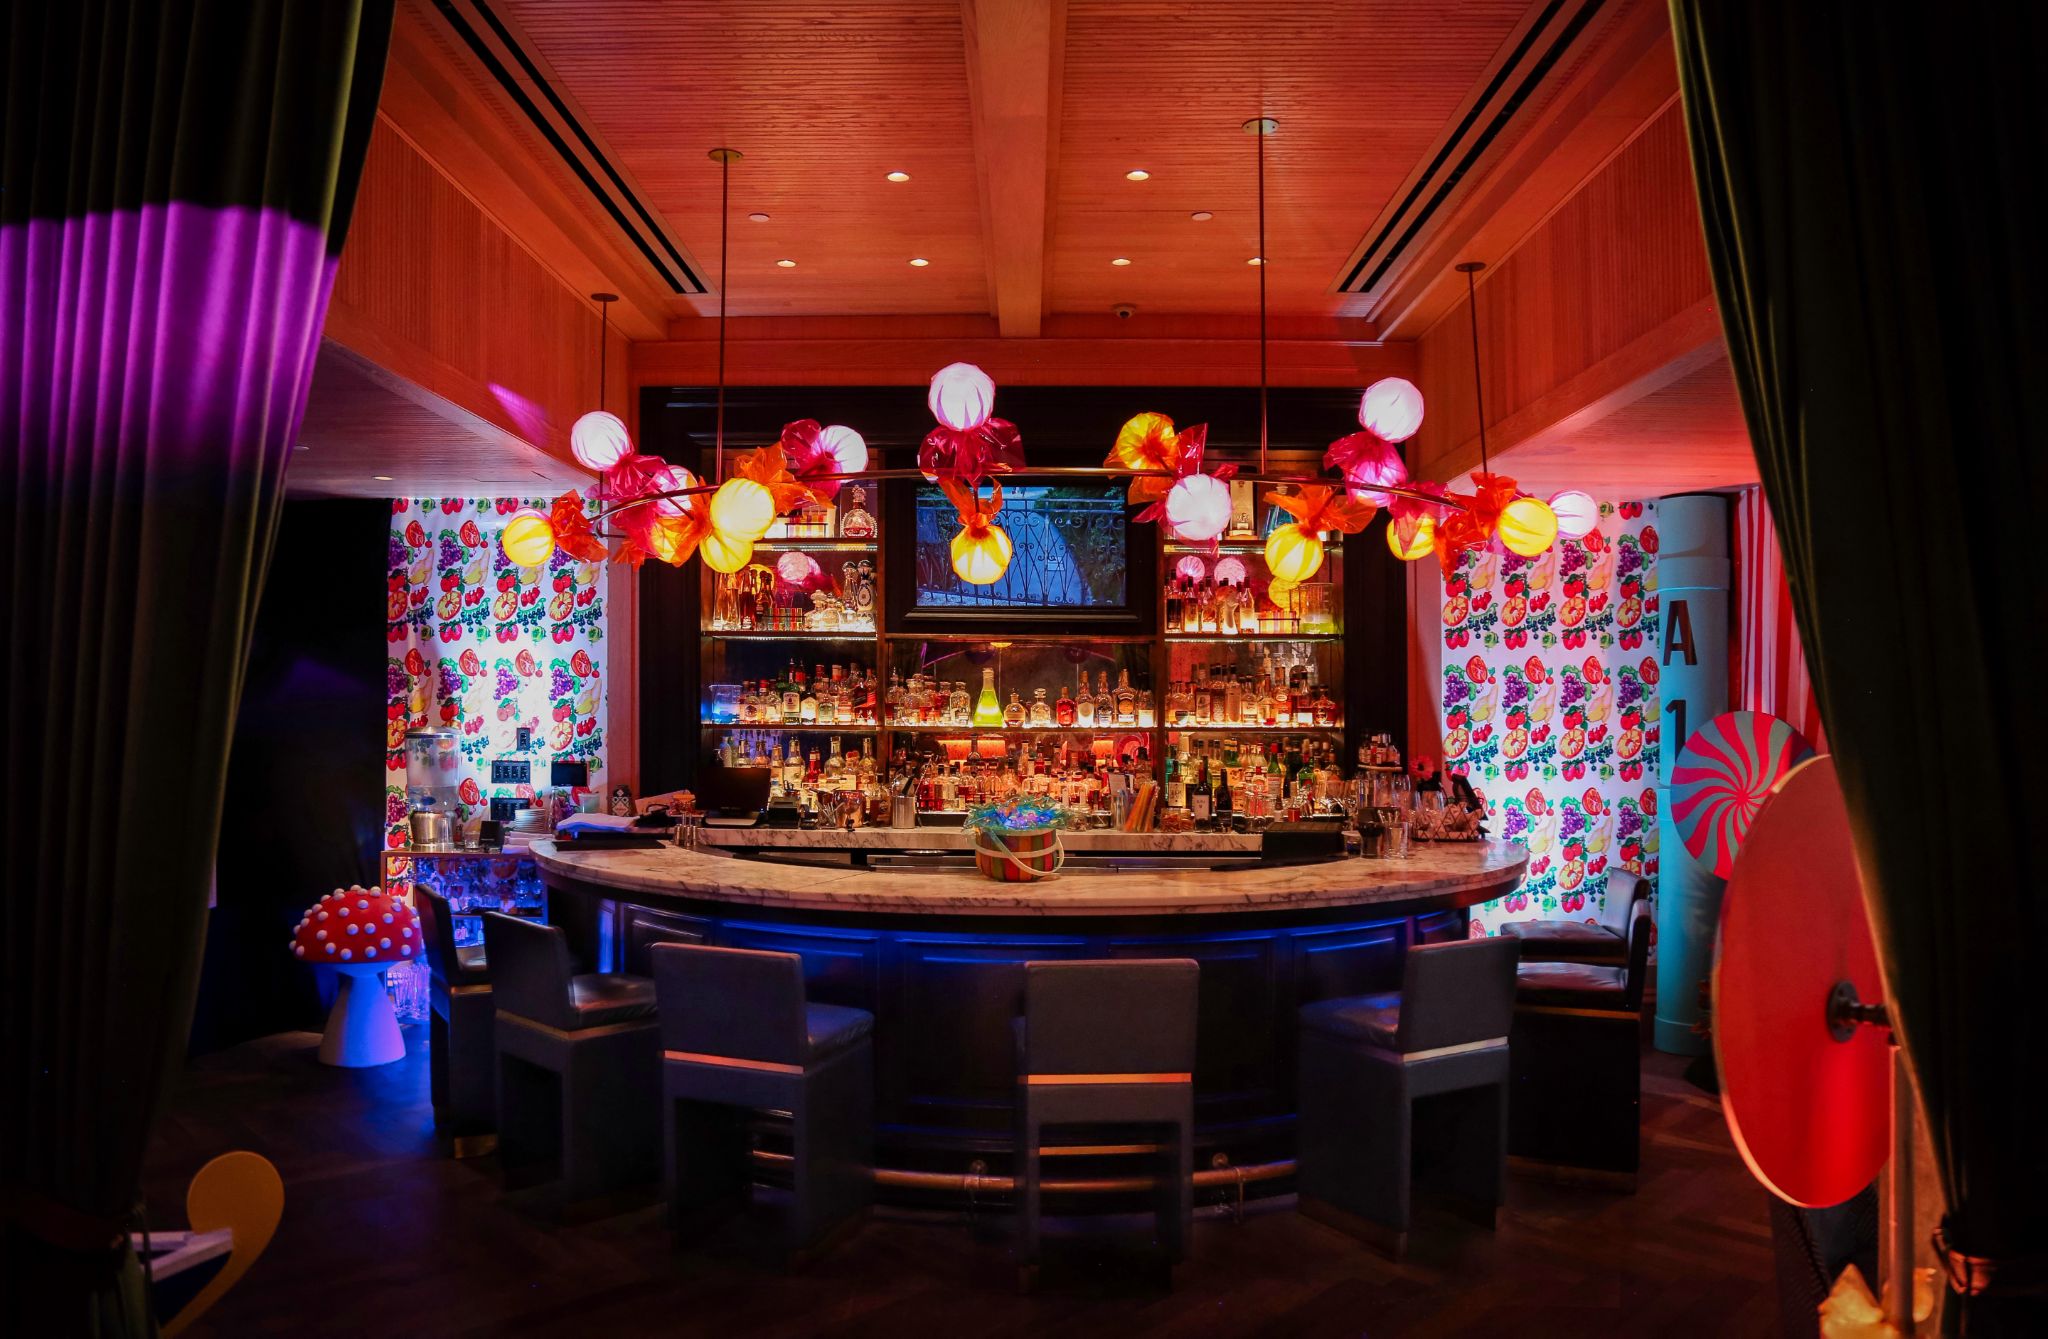 A brightly colored bar bathed in red lights with lights wrapped in candy wrappers and mushroom toadstools. 